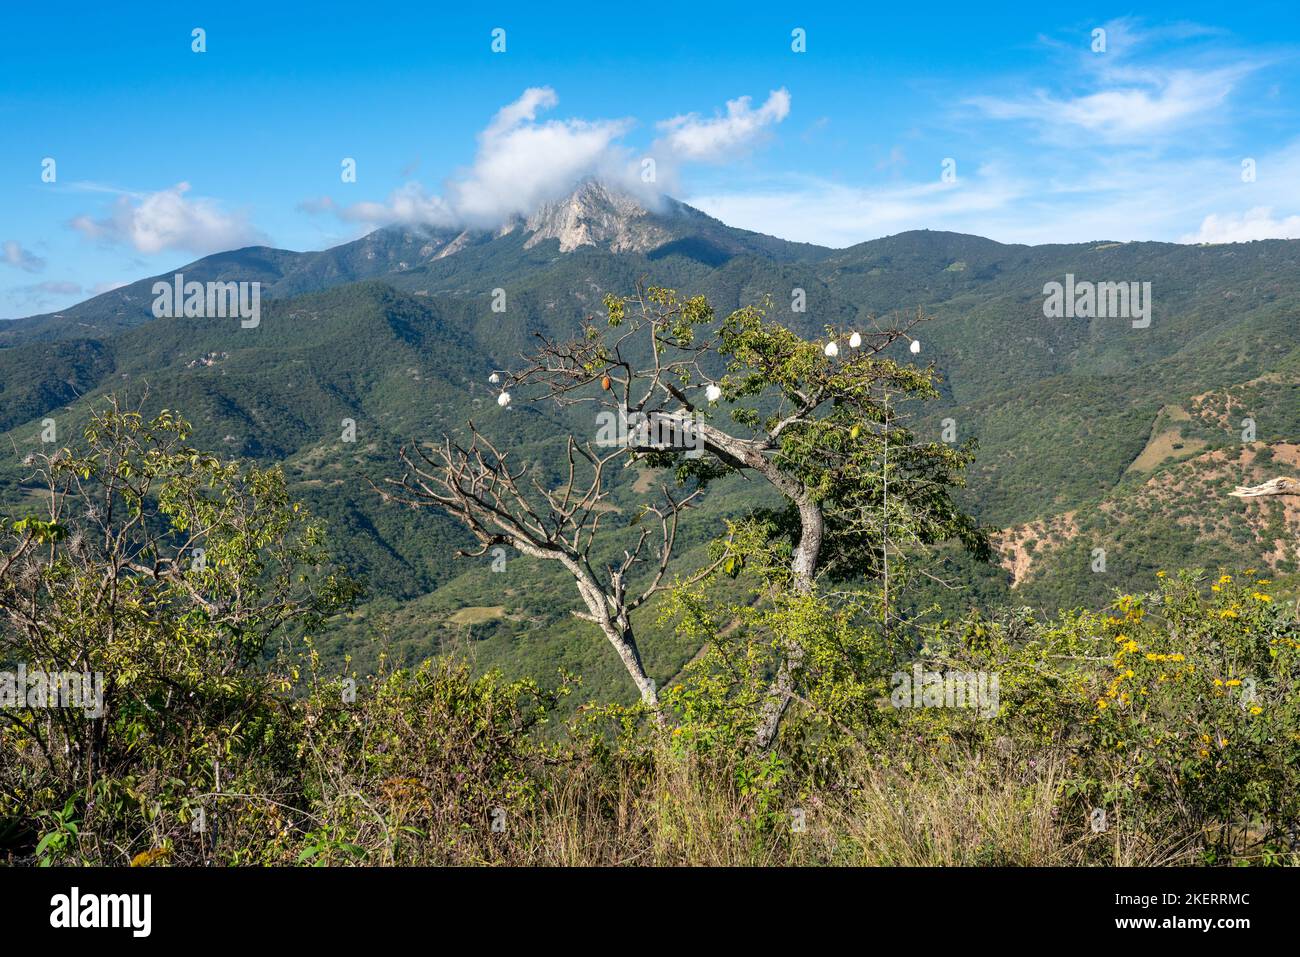 Cazahuate or Tree Morning Glory in the Sierra Mixe Range of the Sierra Madre de Oaxaca Mountains near Hierve el Agua, Mexico. Stock Photo